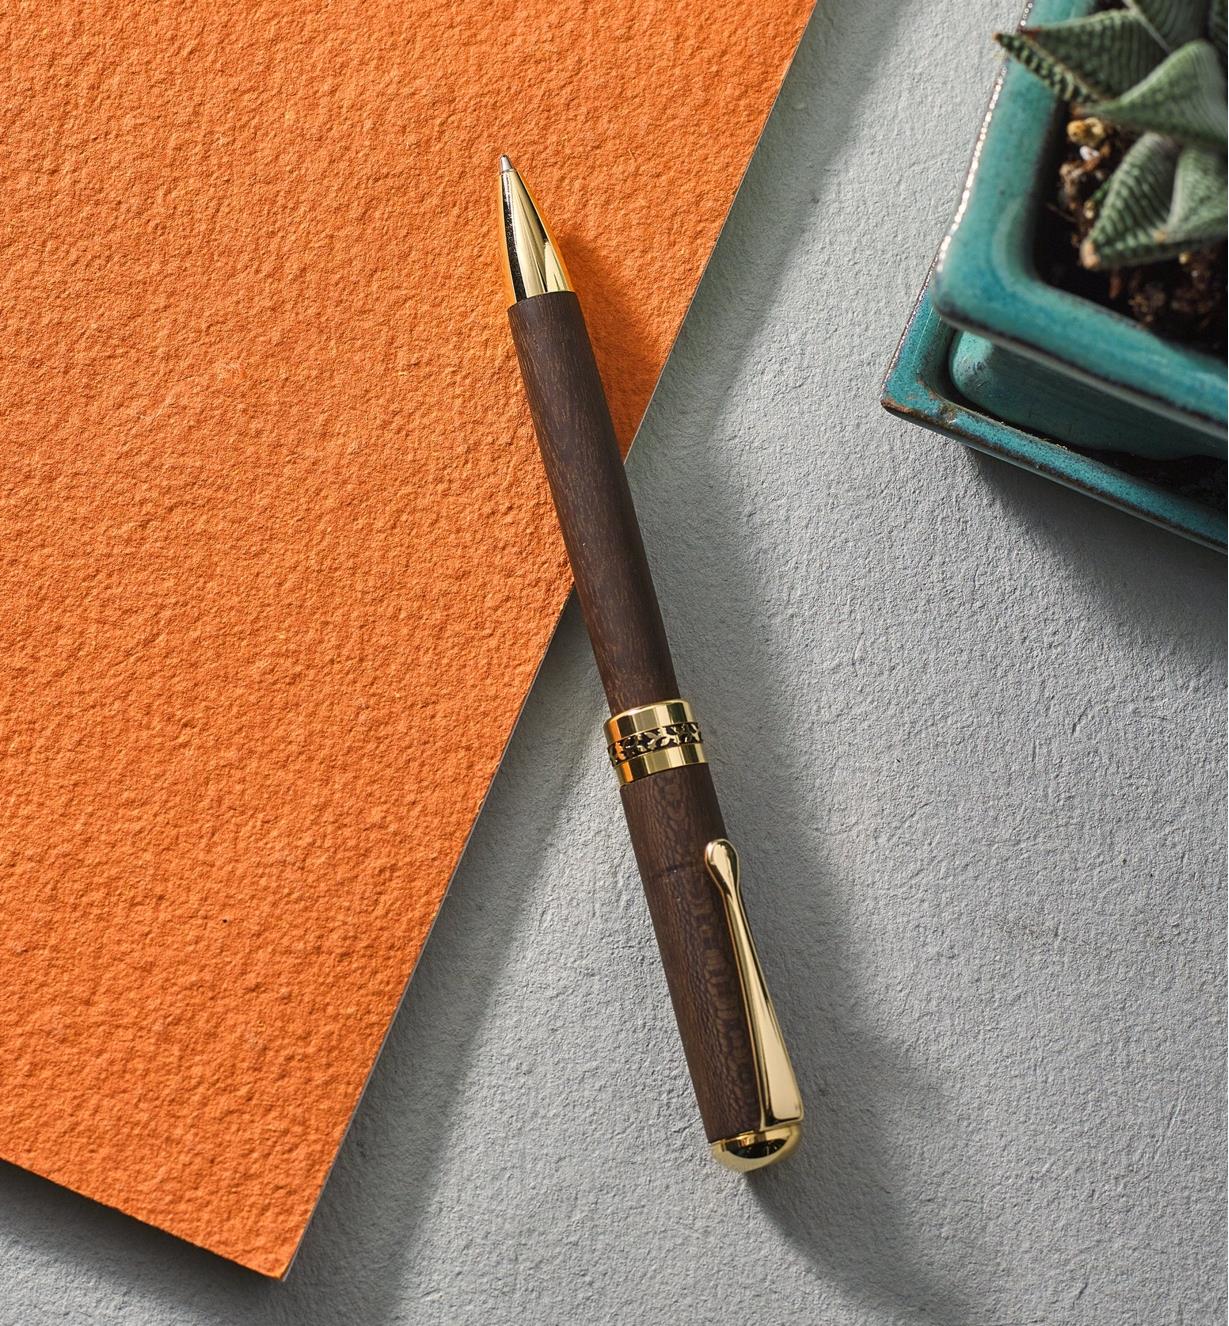 Example of a New Series gold pen turned from a wood blank. 